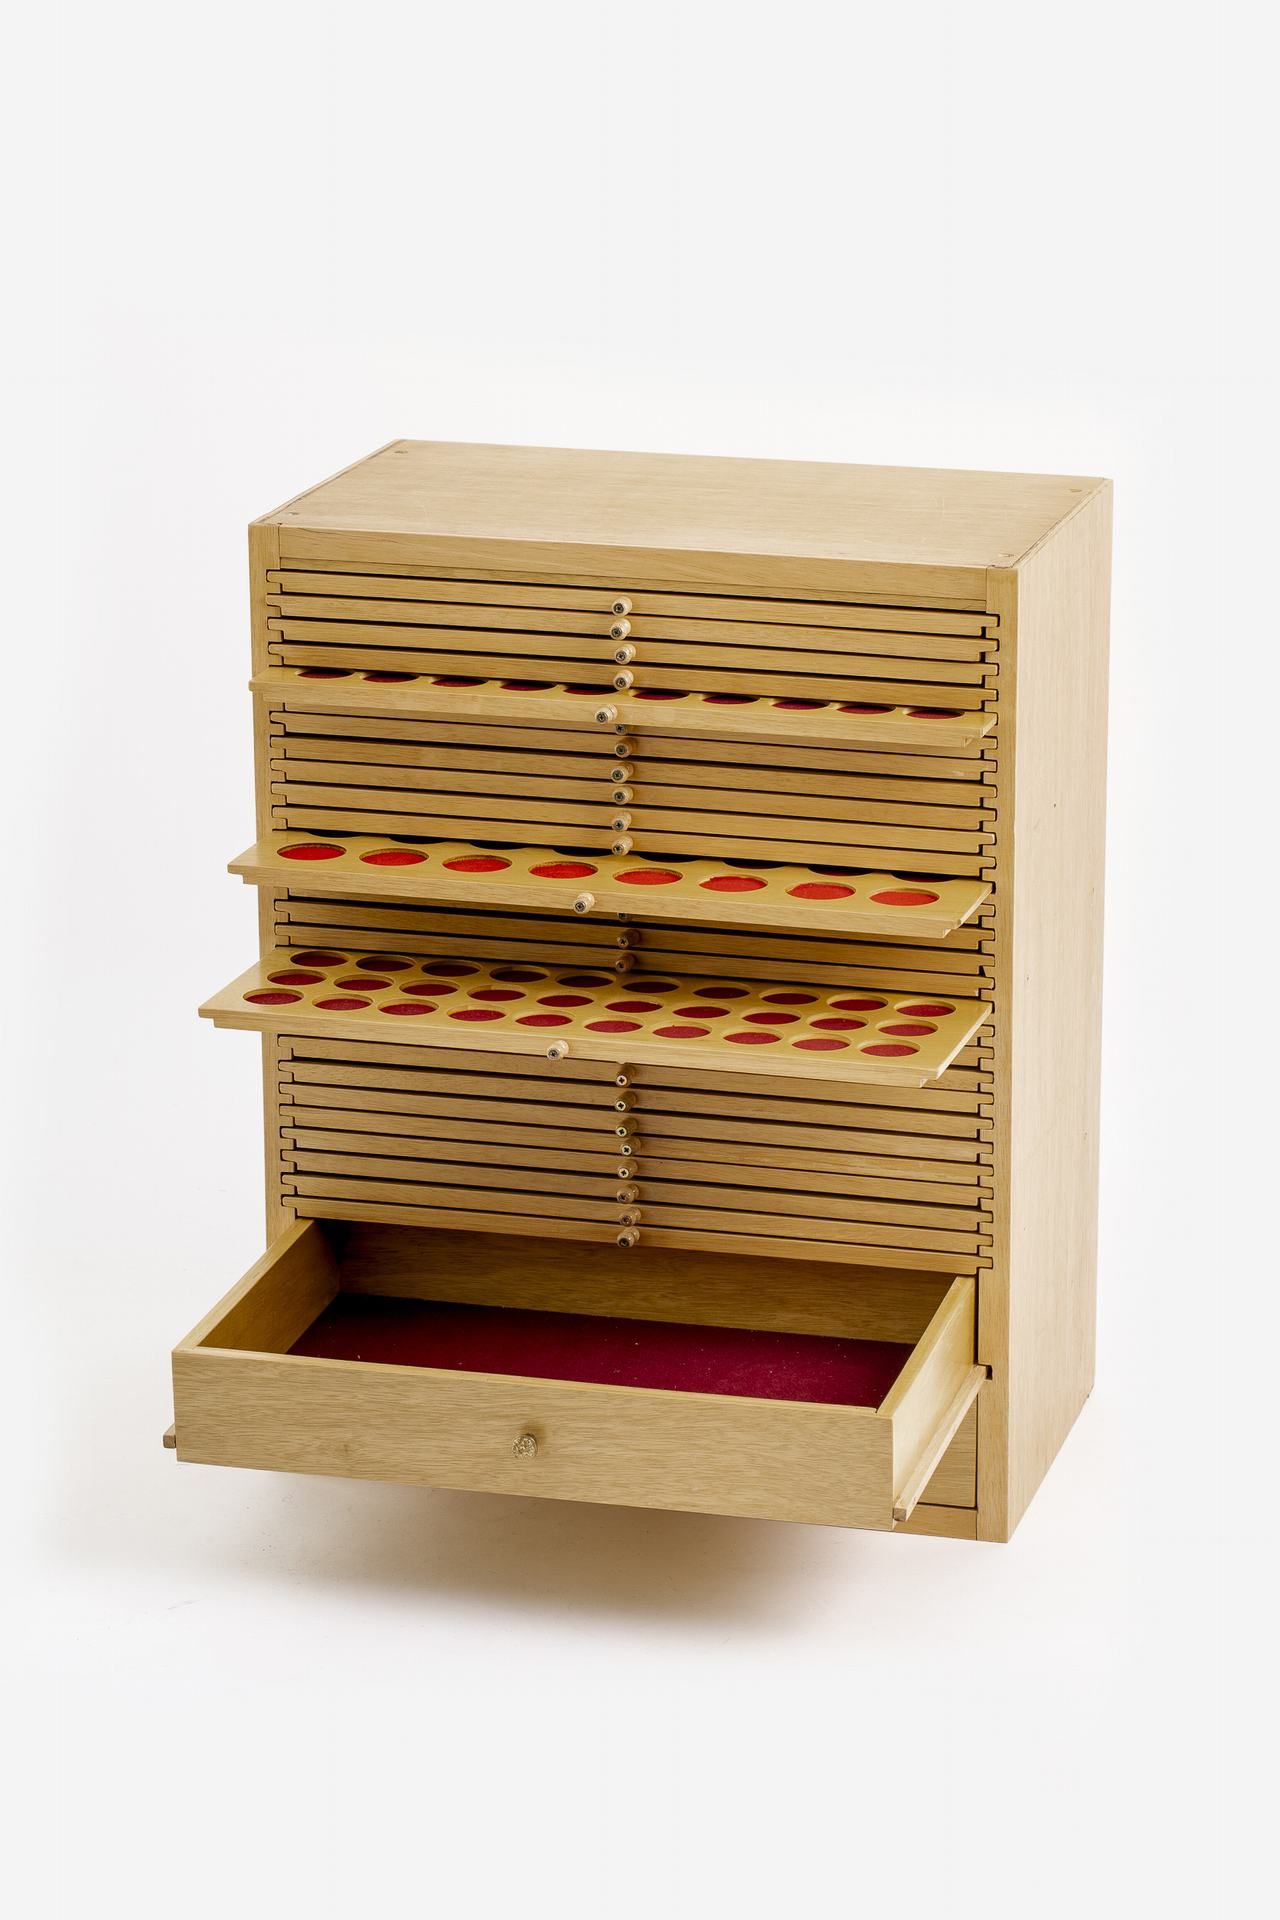 Münzturm Light wood. With 30 drawers for three coin sizes (ø 2.5; 3.5 and 4.0 cm&hellip;